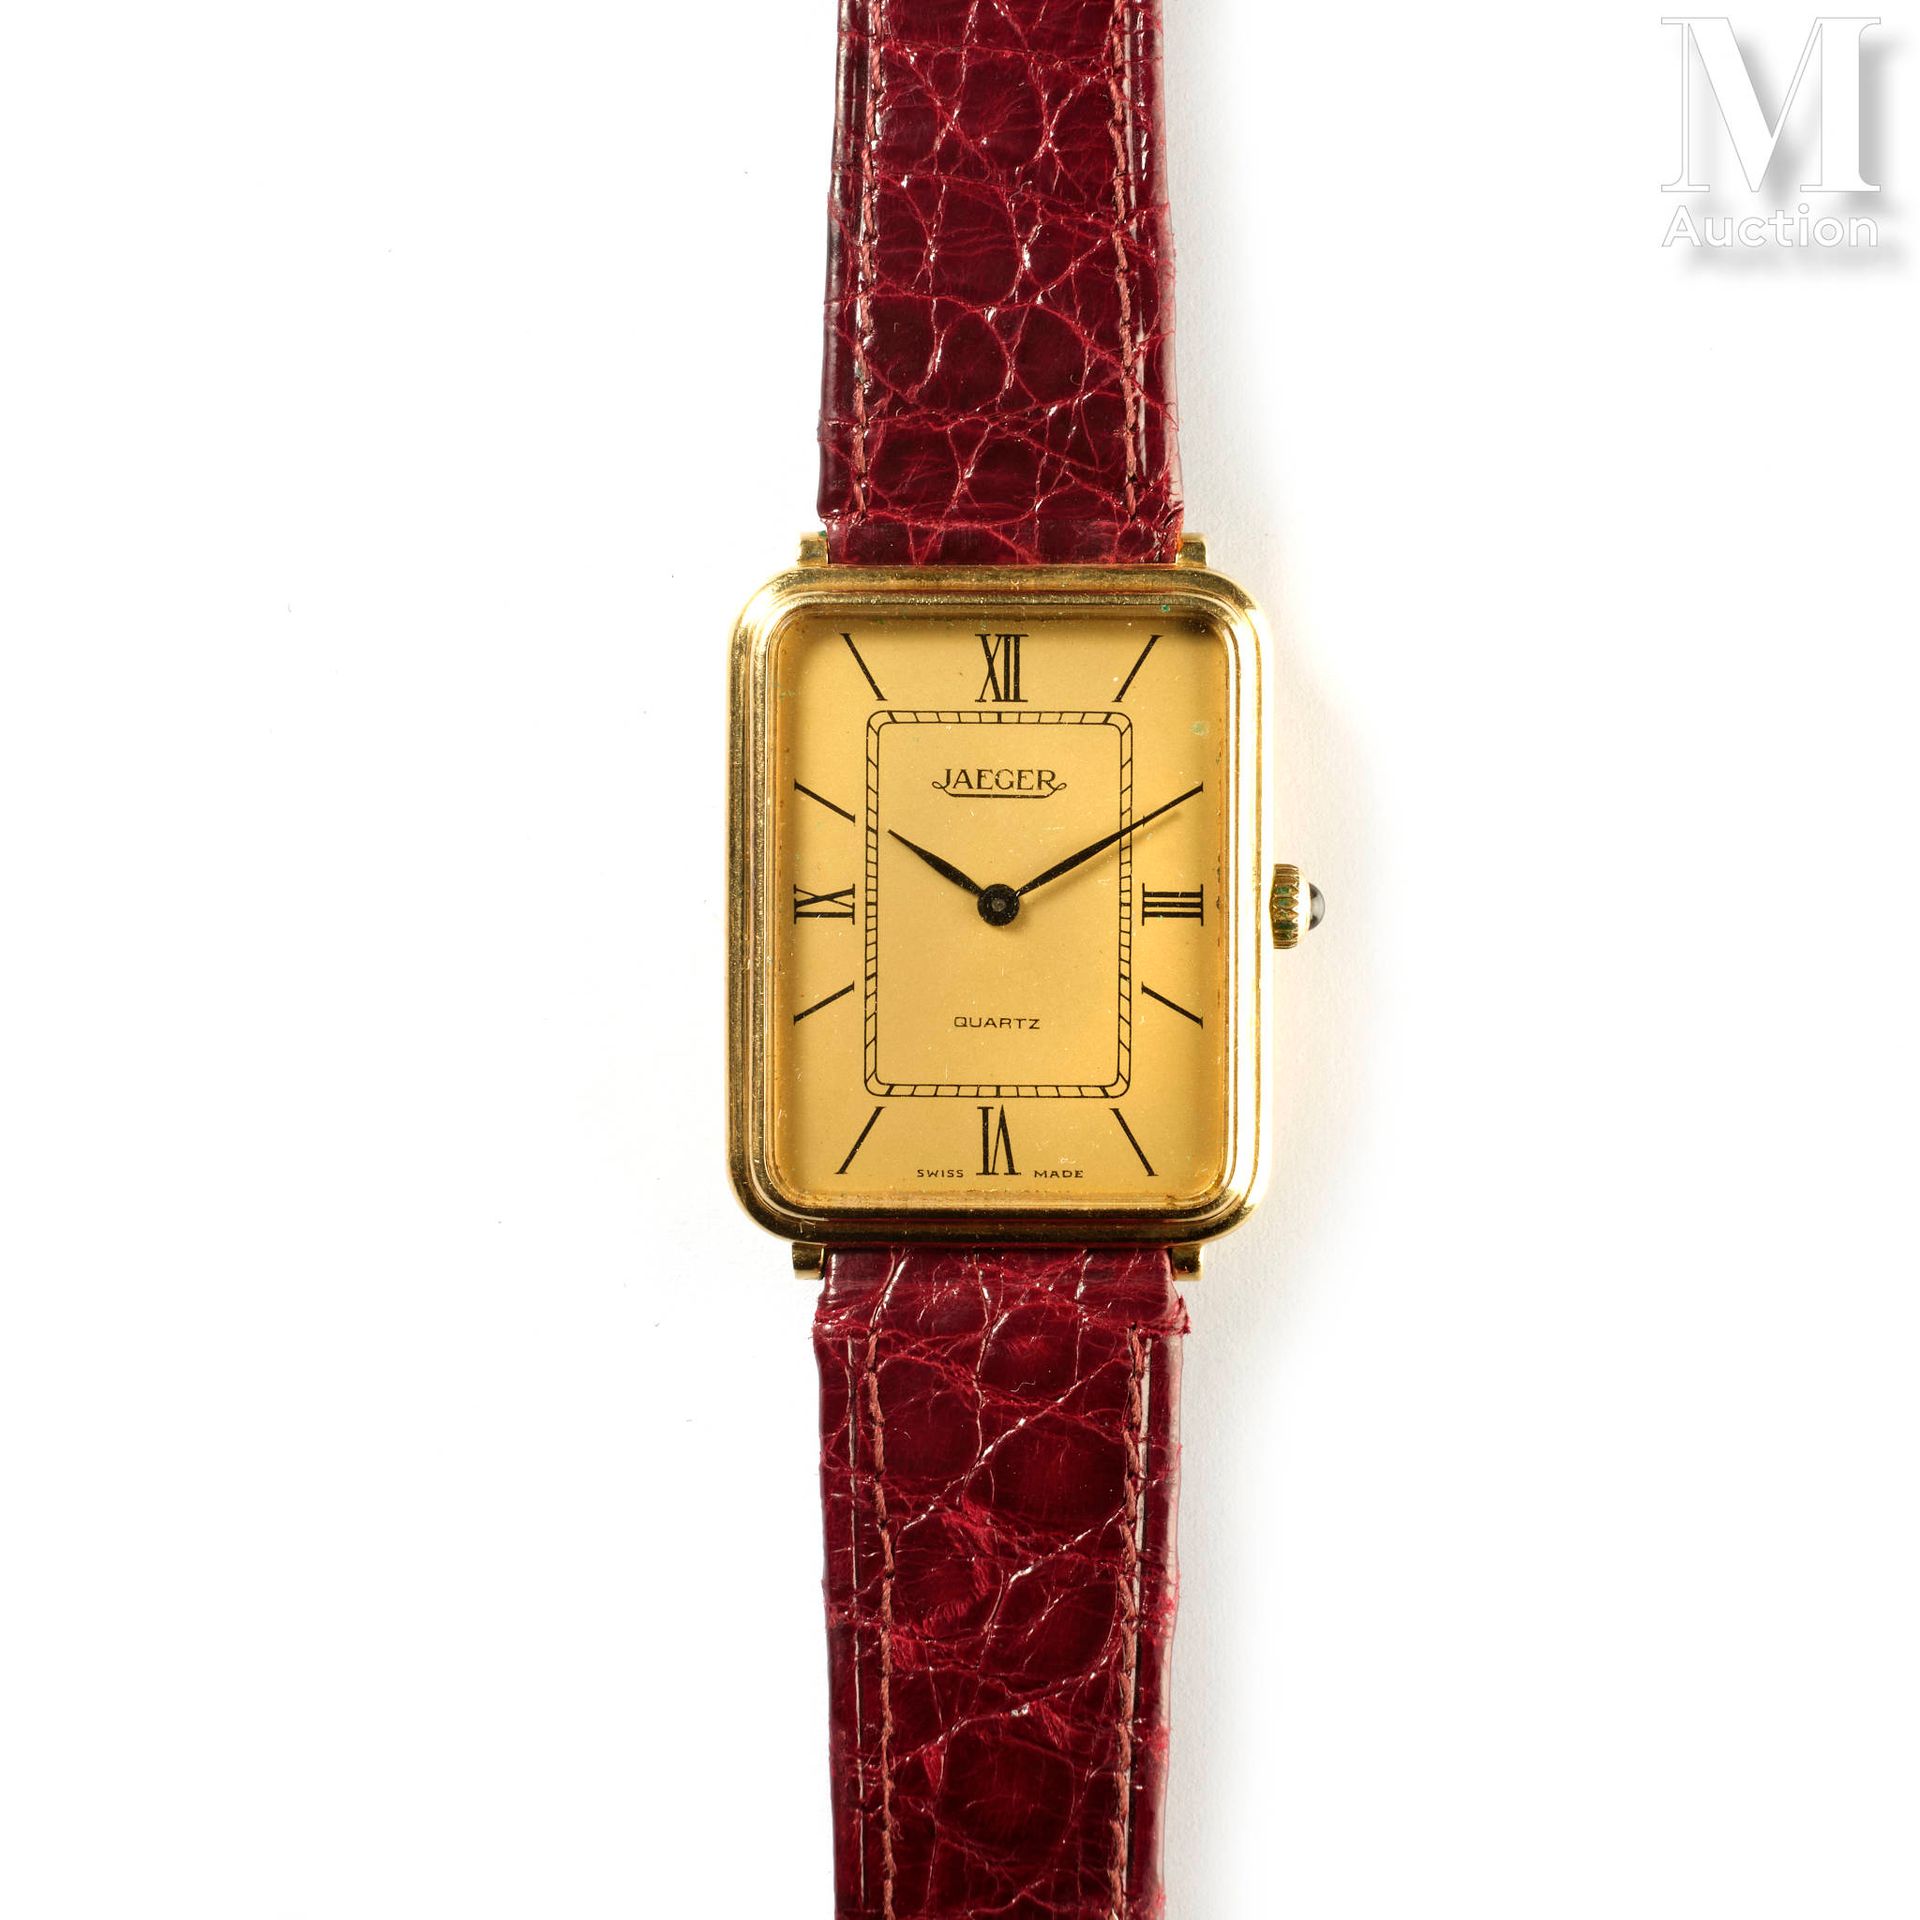 Jaeger Circa 1980
Men's rectangular watch in 18k gold.
Champagne dial with baton&hellip;